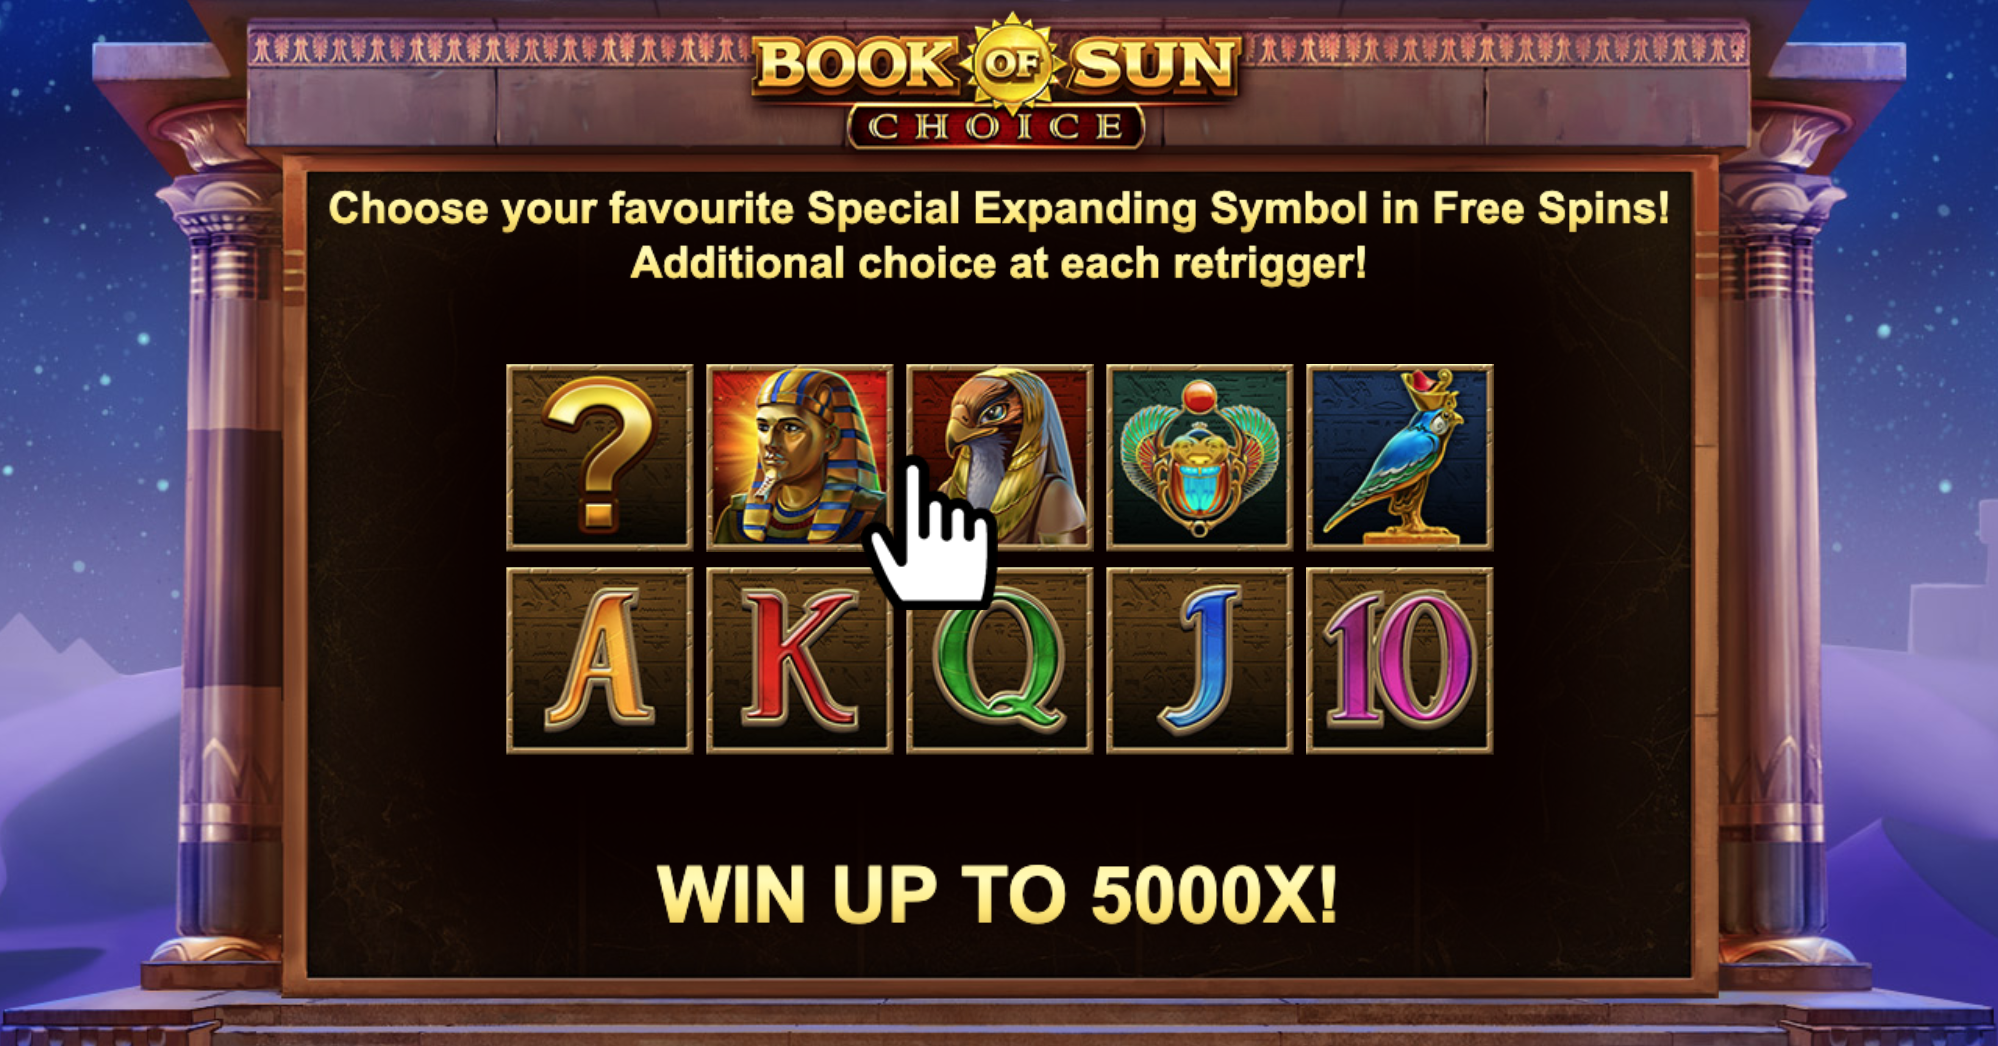 Book-of-Sun-Choice-Free-spins-1